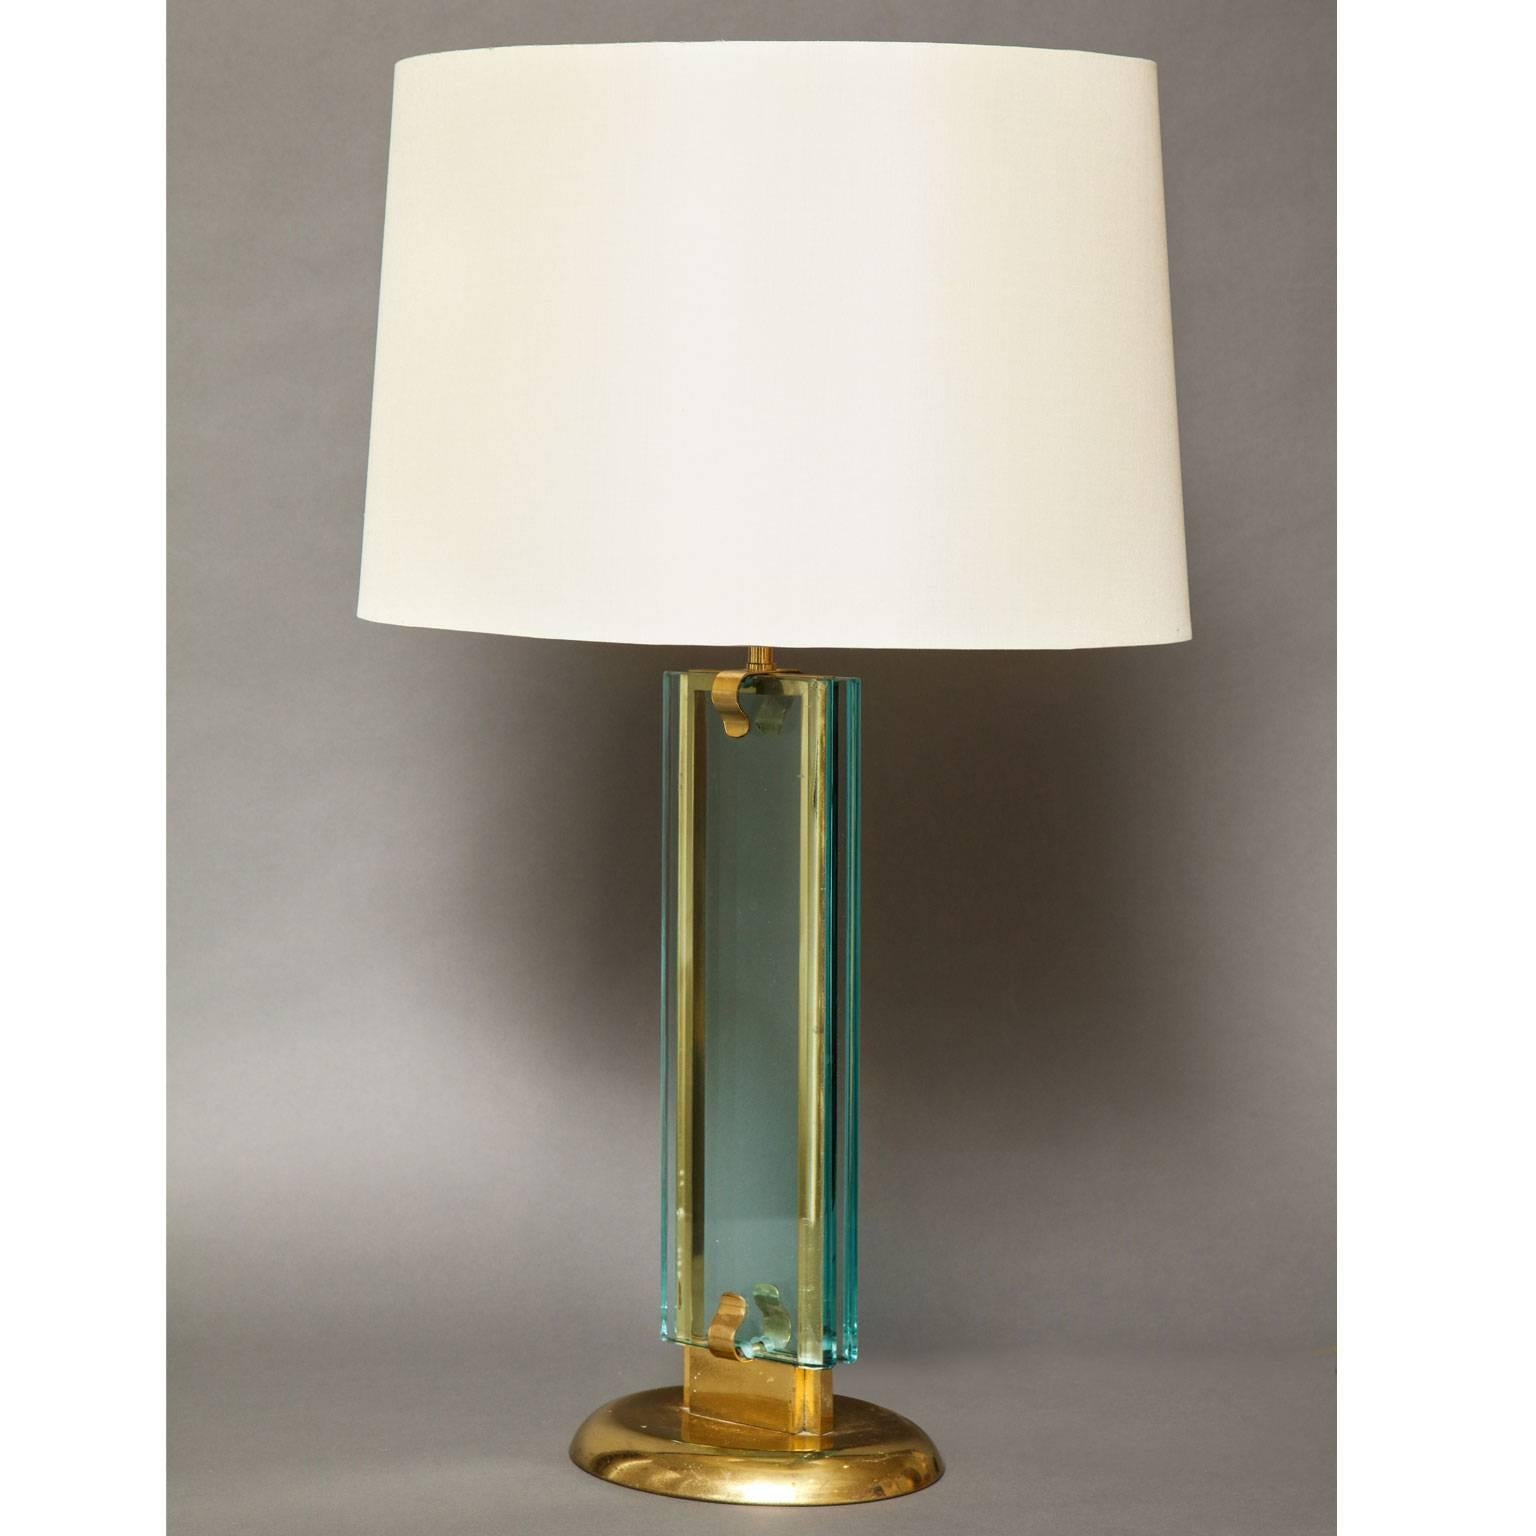 Max Ingrand (1908-1969)
Table lamp with two green beveled glass slabs mounted to brass
fittings on a domed brass base. Executed by Fontana Arte.
Italian, circa 1950

Measurements:
32” H x 9” W x 6” D.
 